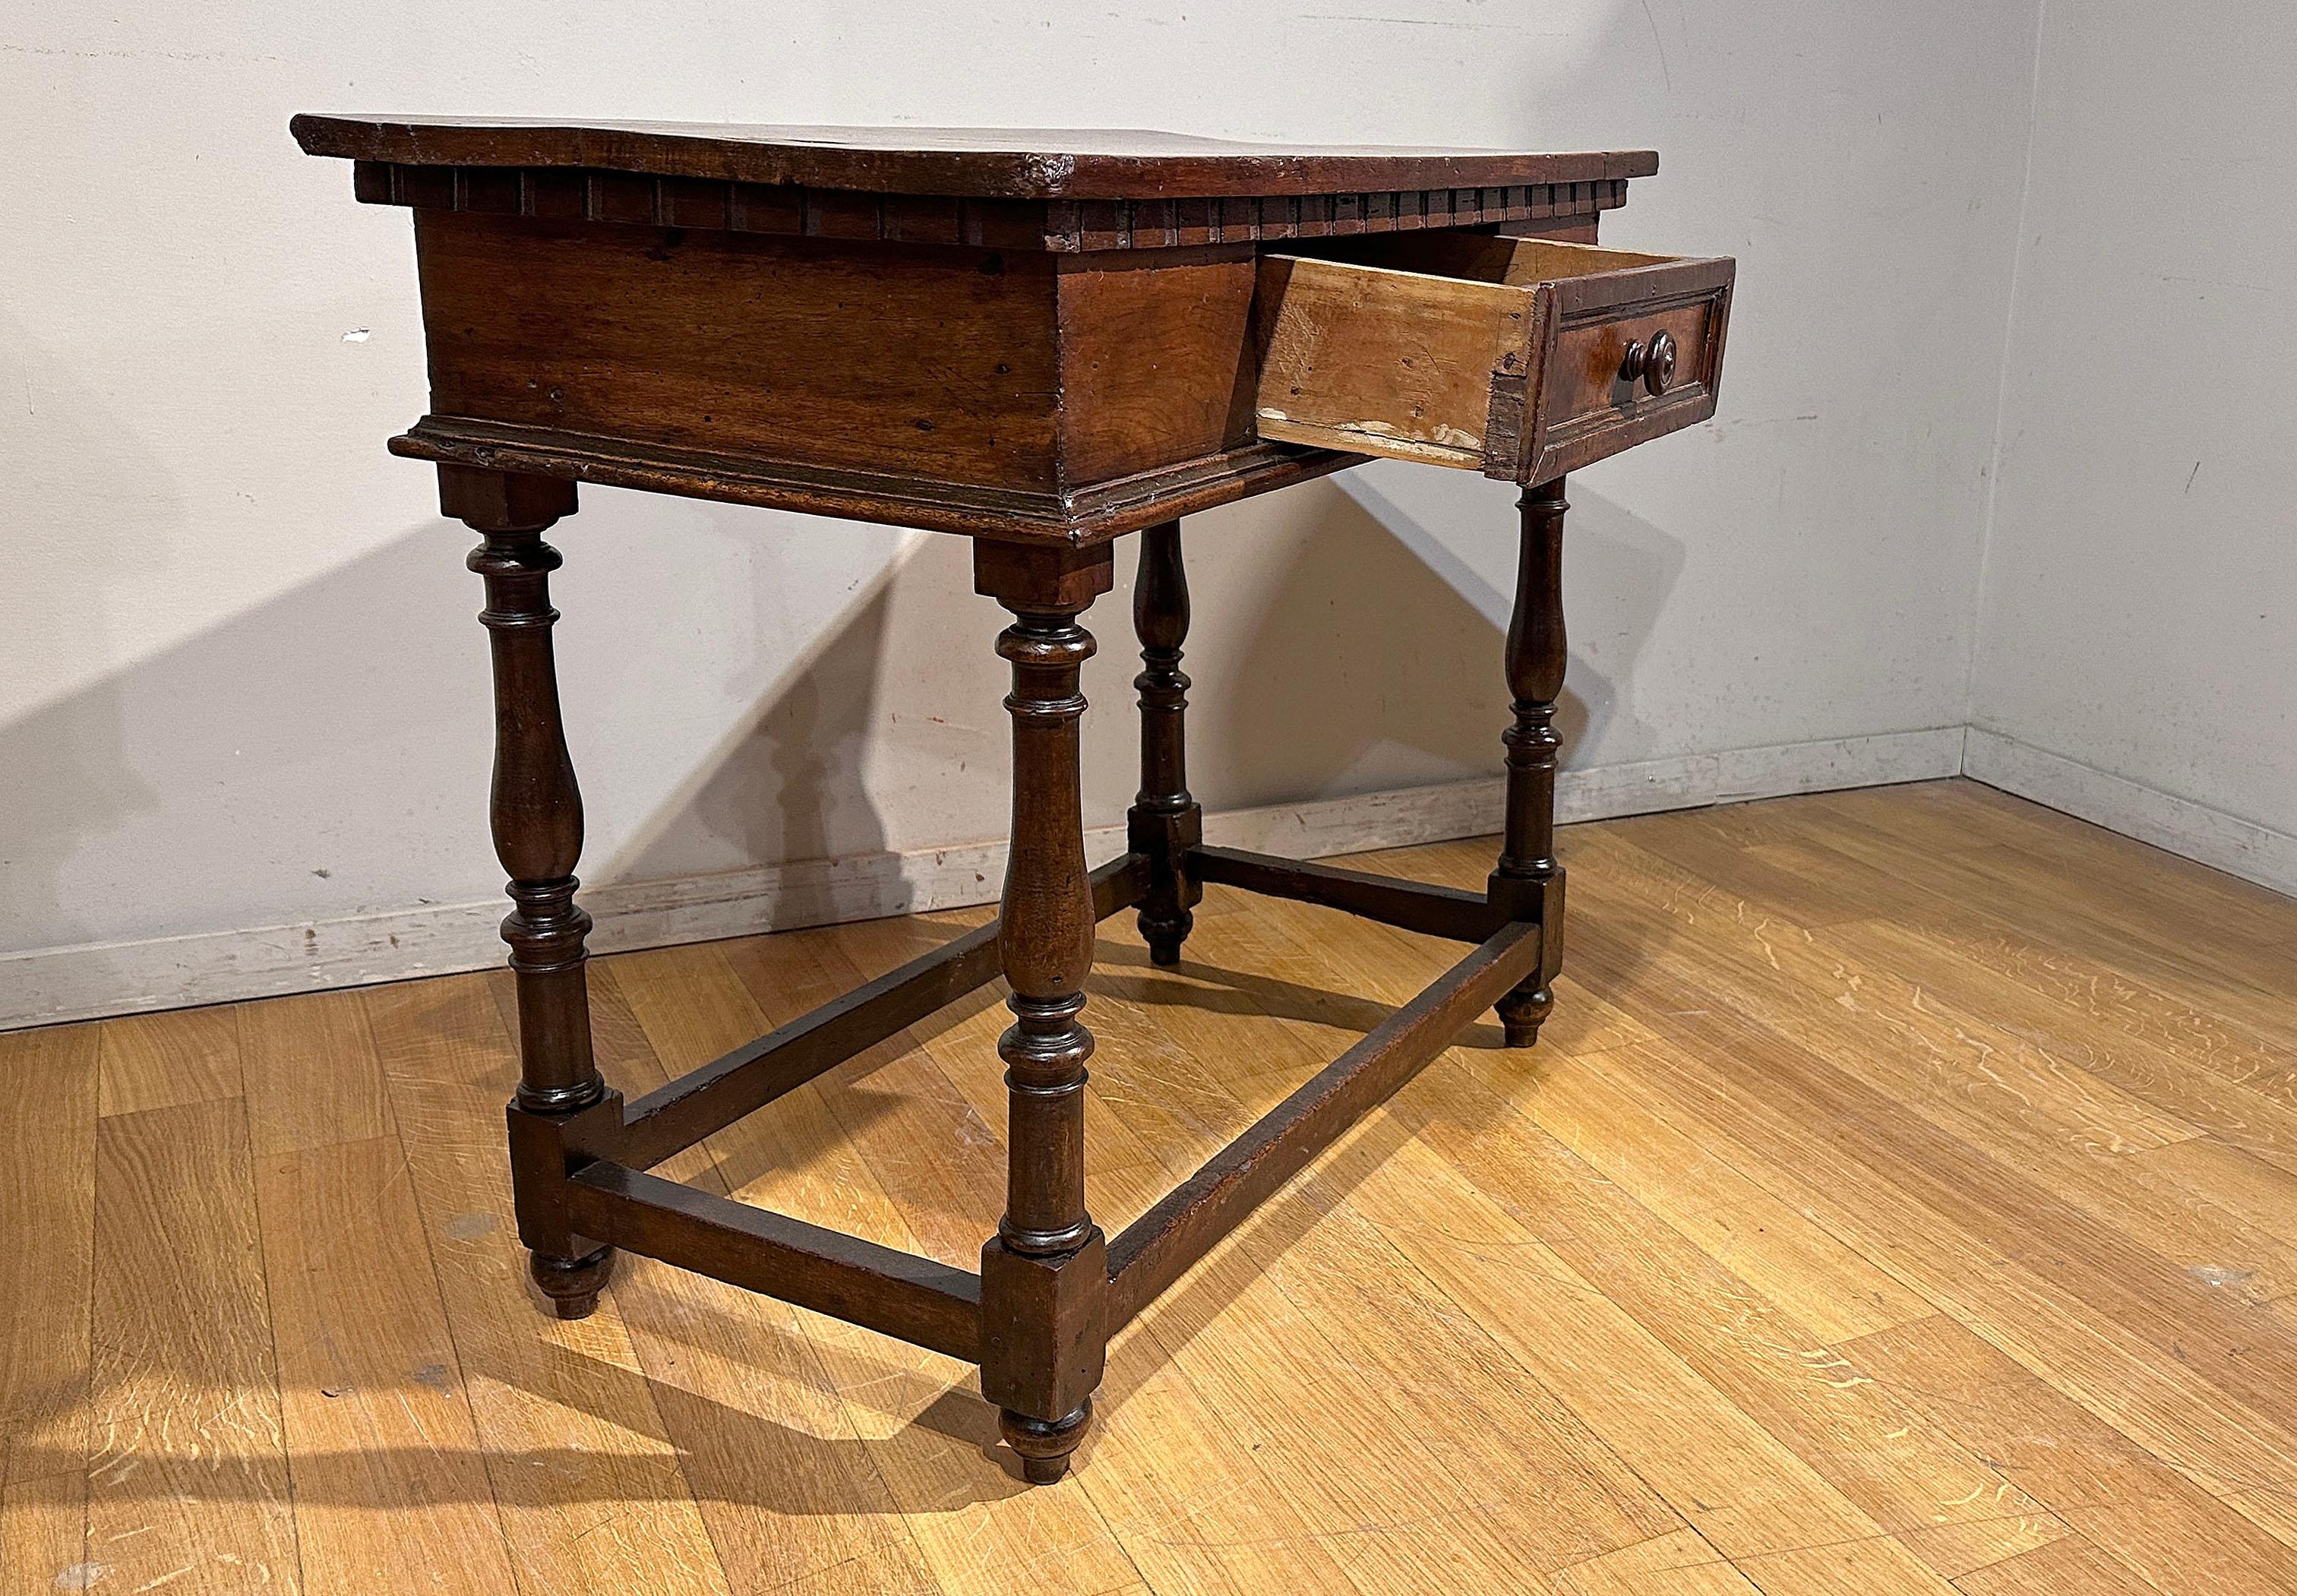 Italian END OF THE 16th CENTURY LOUIS XIV TABLE WITH DRAWER For Sale